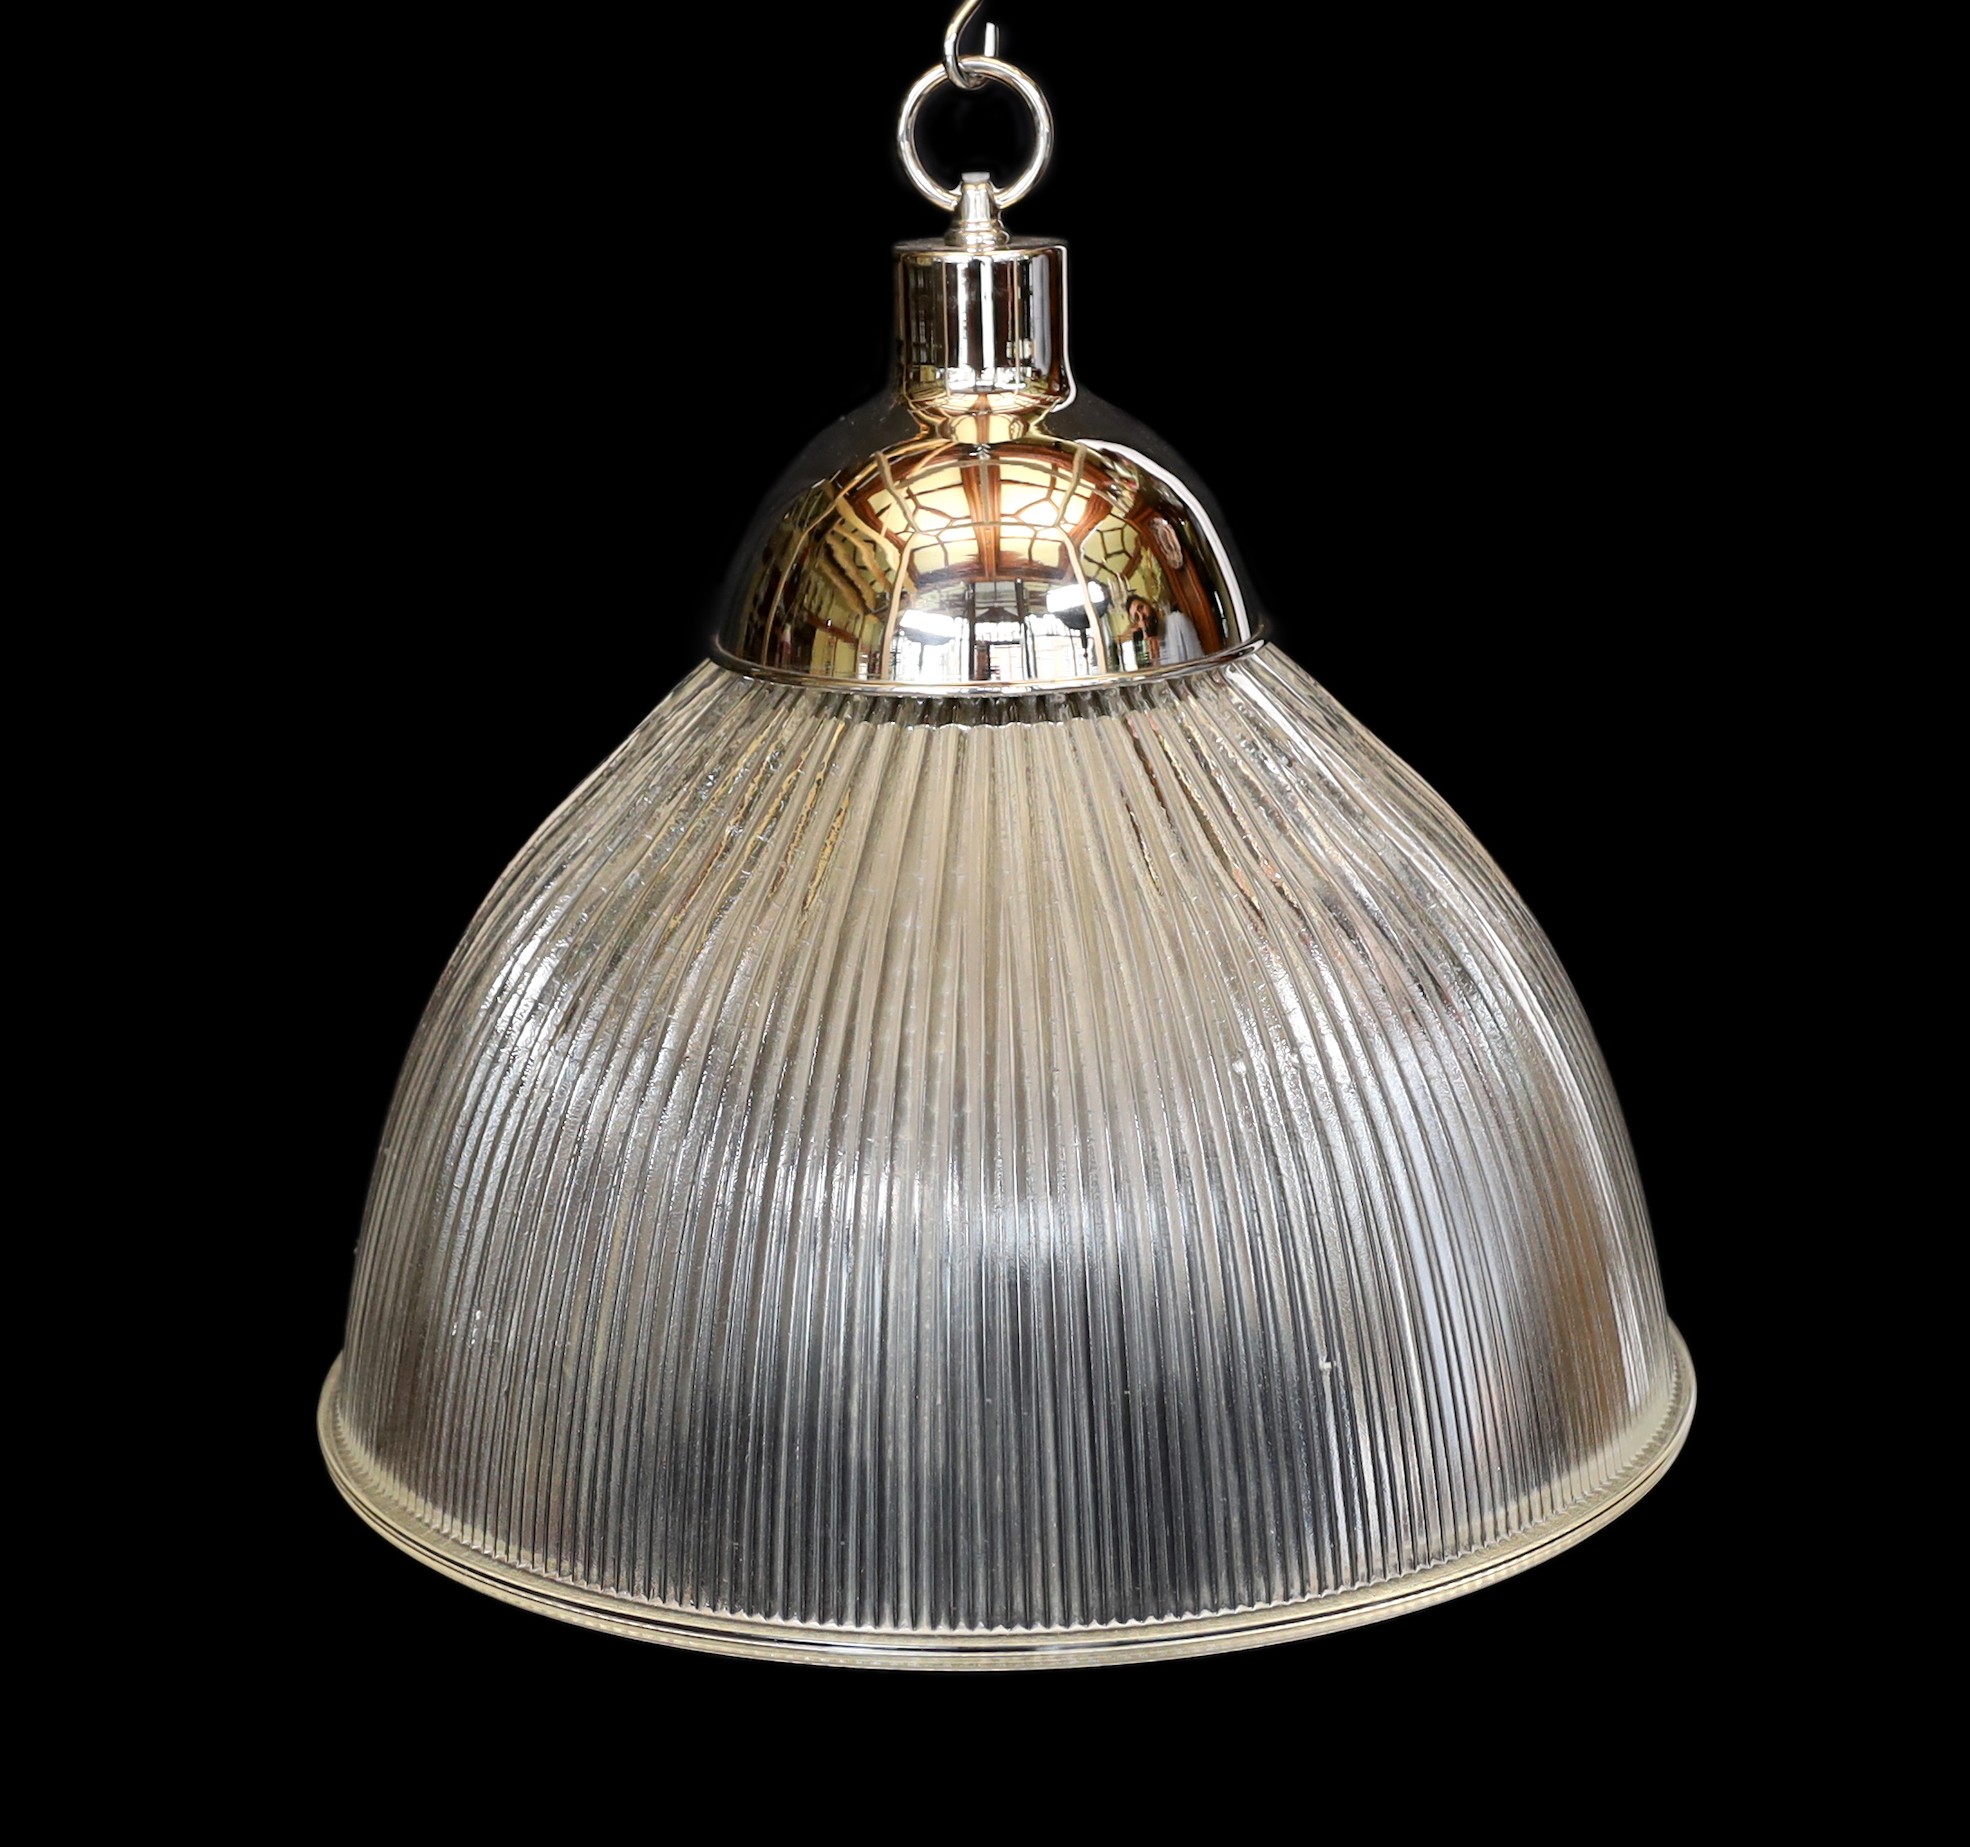 A pair of industrial style chrome plated ceiling lights with ribbed glass shades, signed Endural, diameter 46.5cm. height 50cm